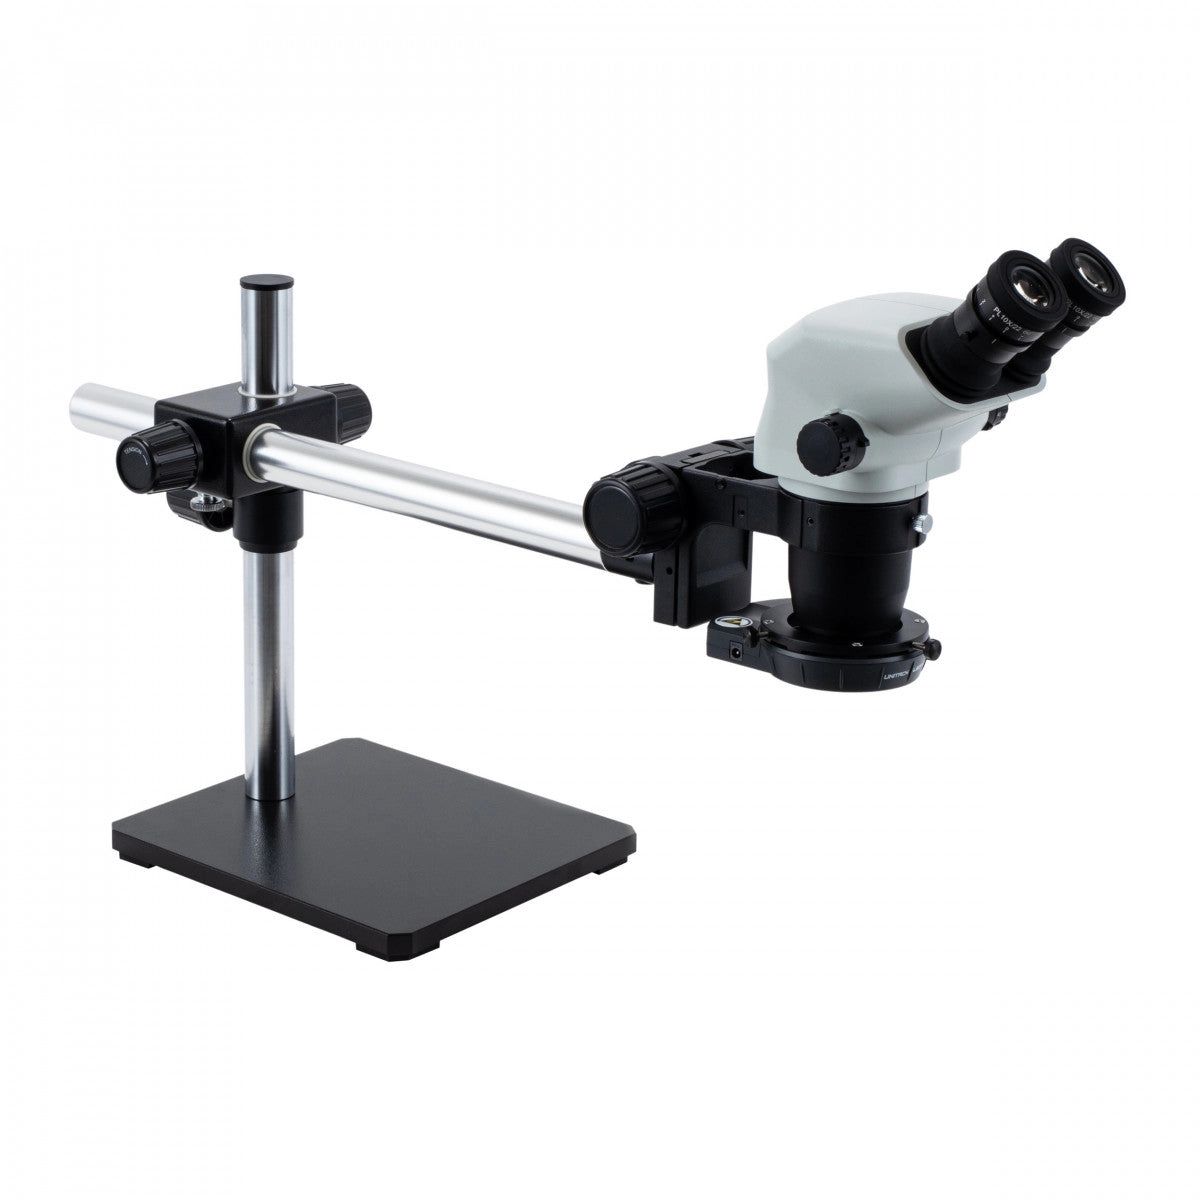 Unitron Z645 Zoom Stereo Microscope, Binocular with Boom Stand | 0.5x Aux Objective | LED140 Ring Light